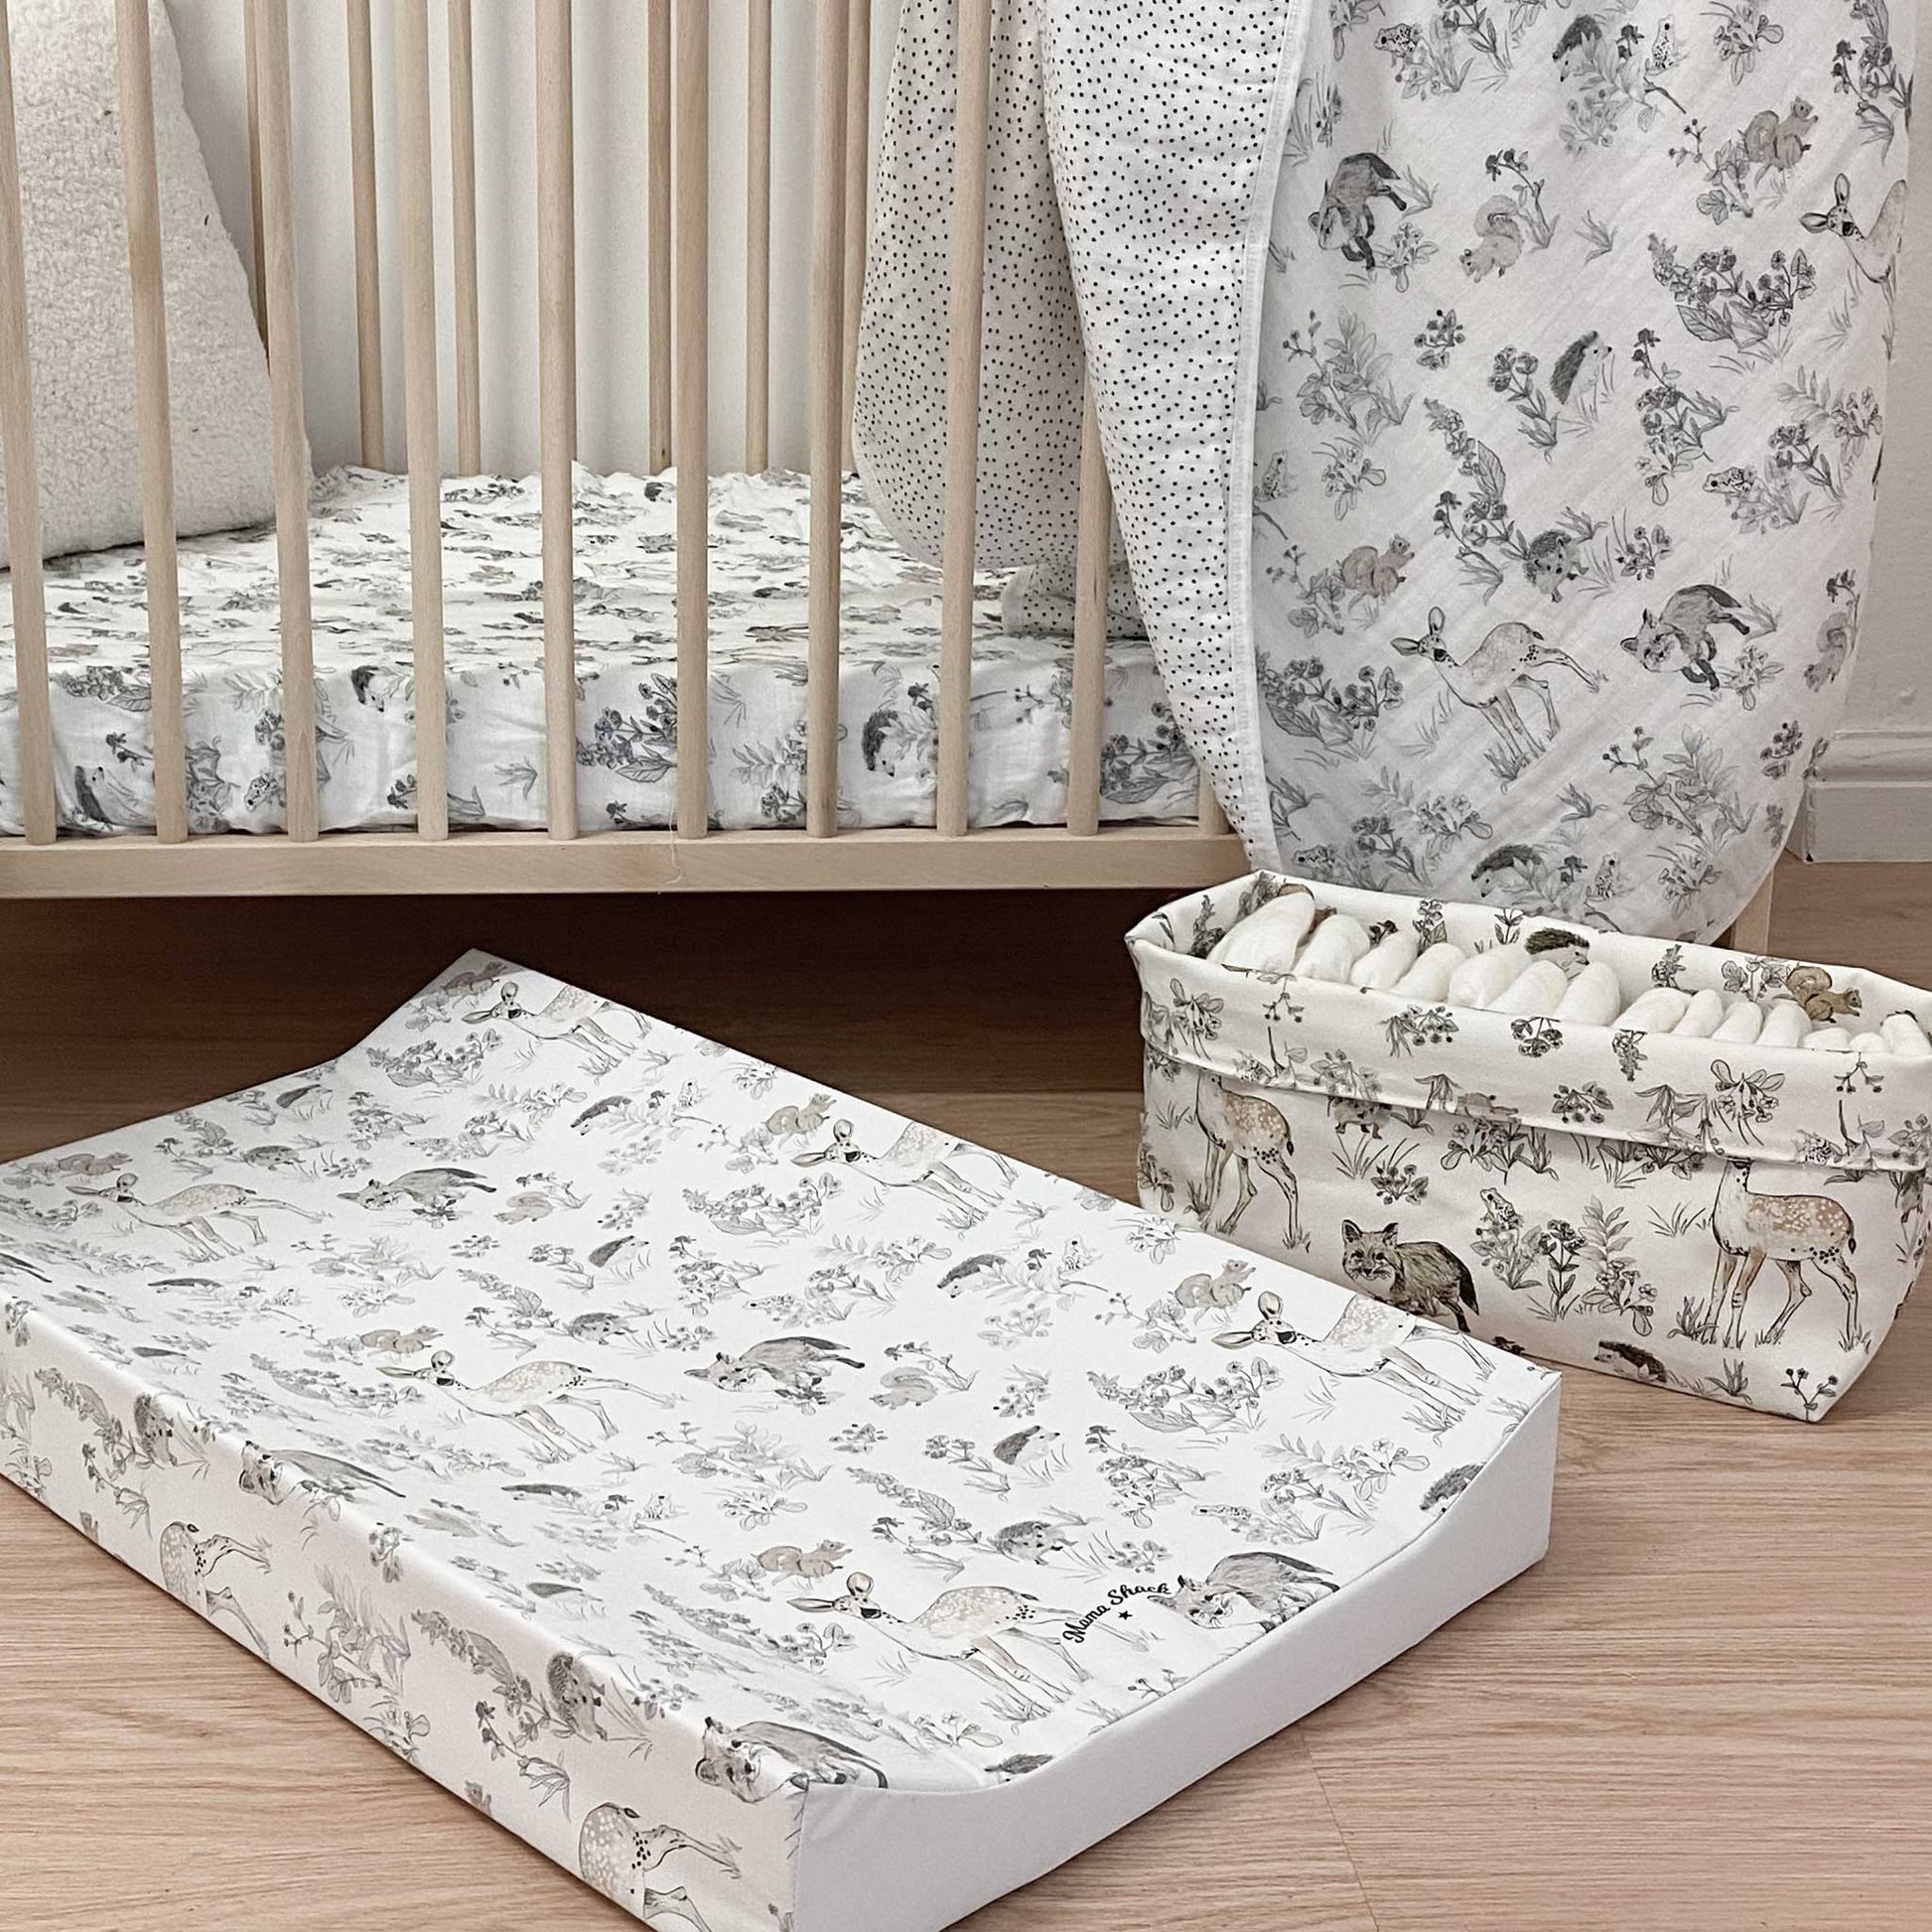 Explore our other decor items in our beautiful Woodland print here.